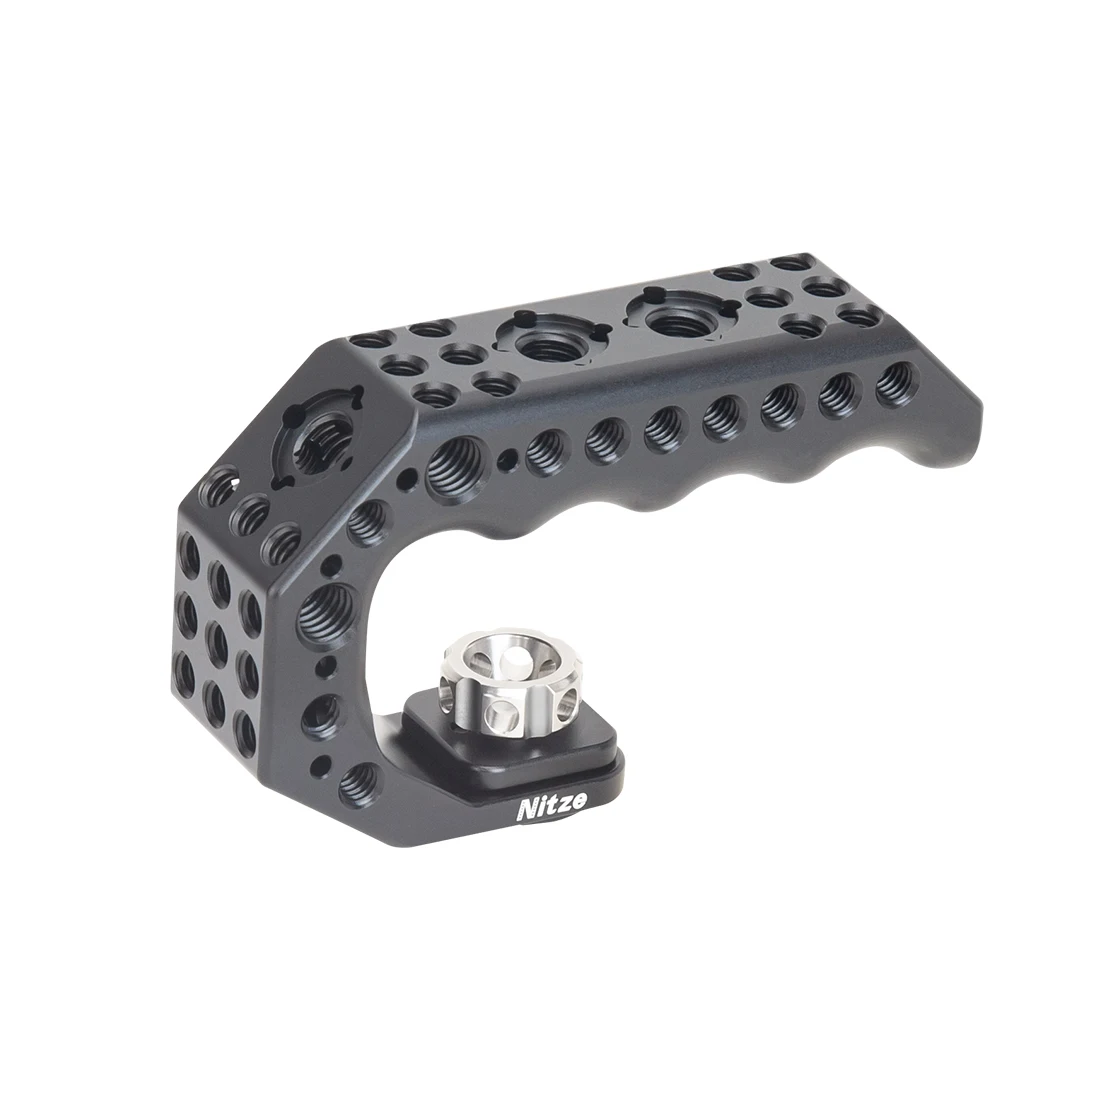 

NITZE STINGER Quick Release Top HANDLE WITH 3/8” ARRI LOCATING PINS - PA28M-BK Universal For NITZE BMPCC 4K Cage